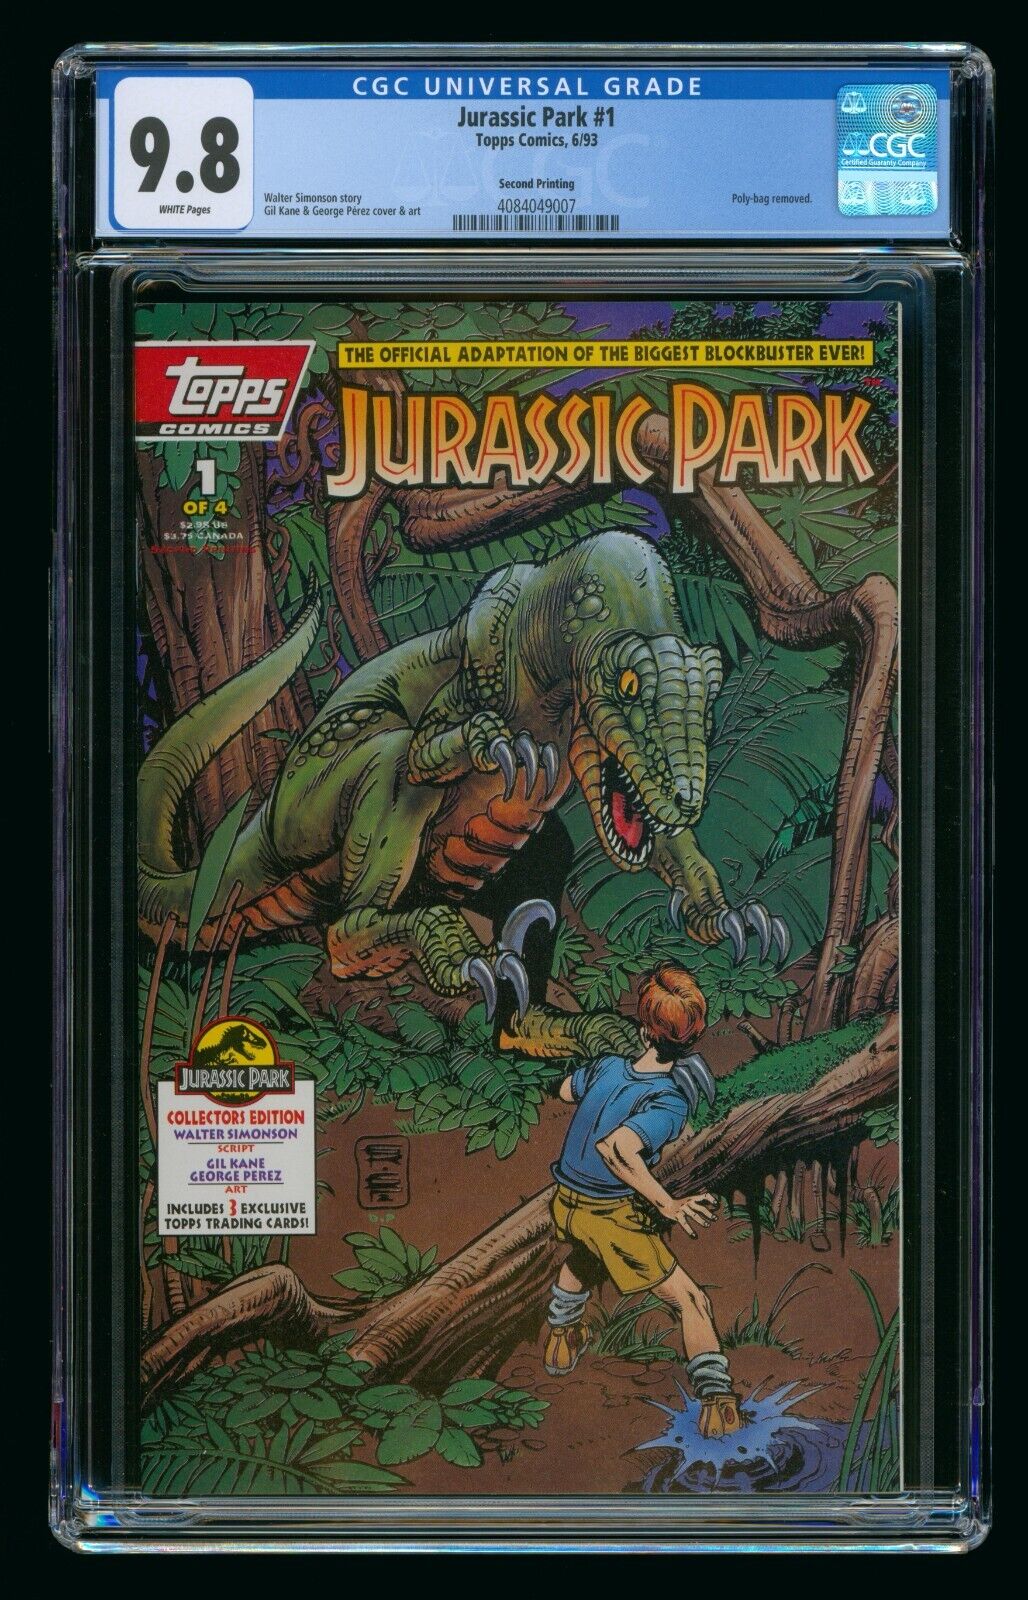 JURASSIC PARK #1 (1993) CGC 9.8 TOPPS COMICS 2nd PRINT VARIANT WHITE PAGES